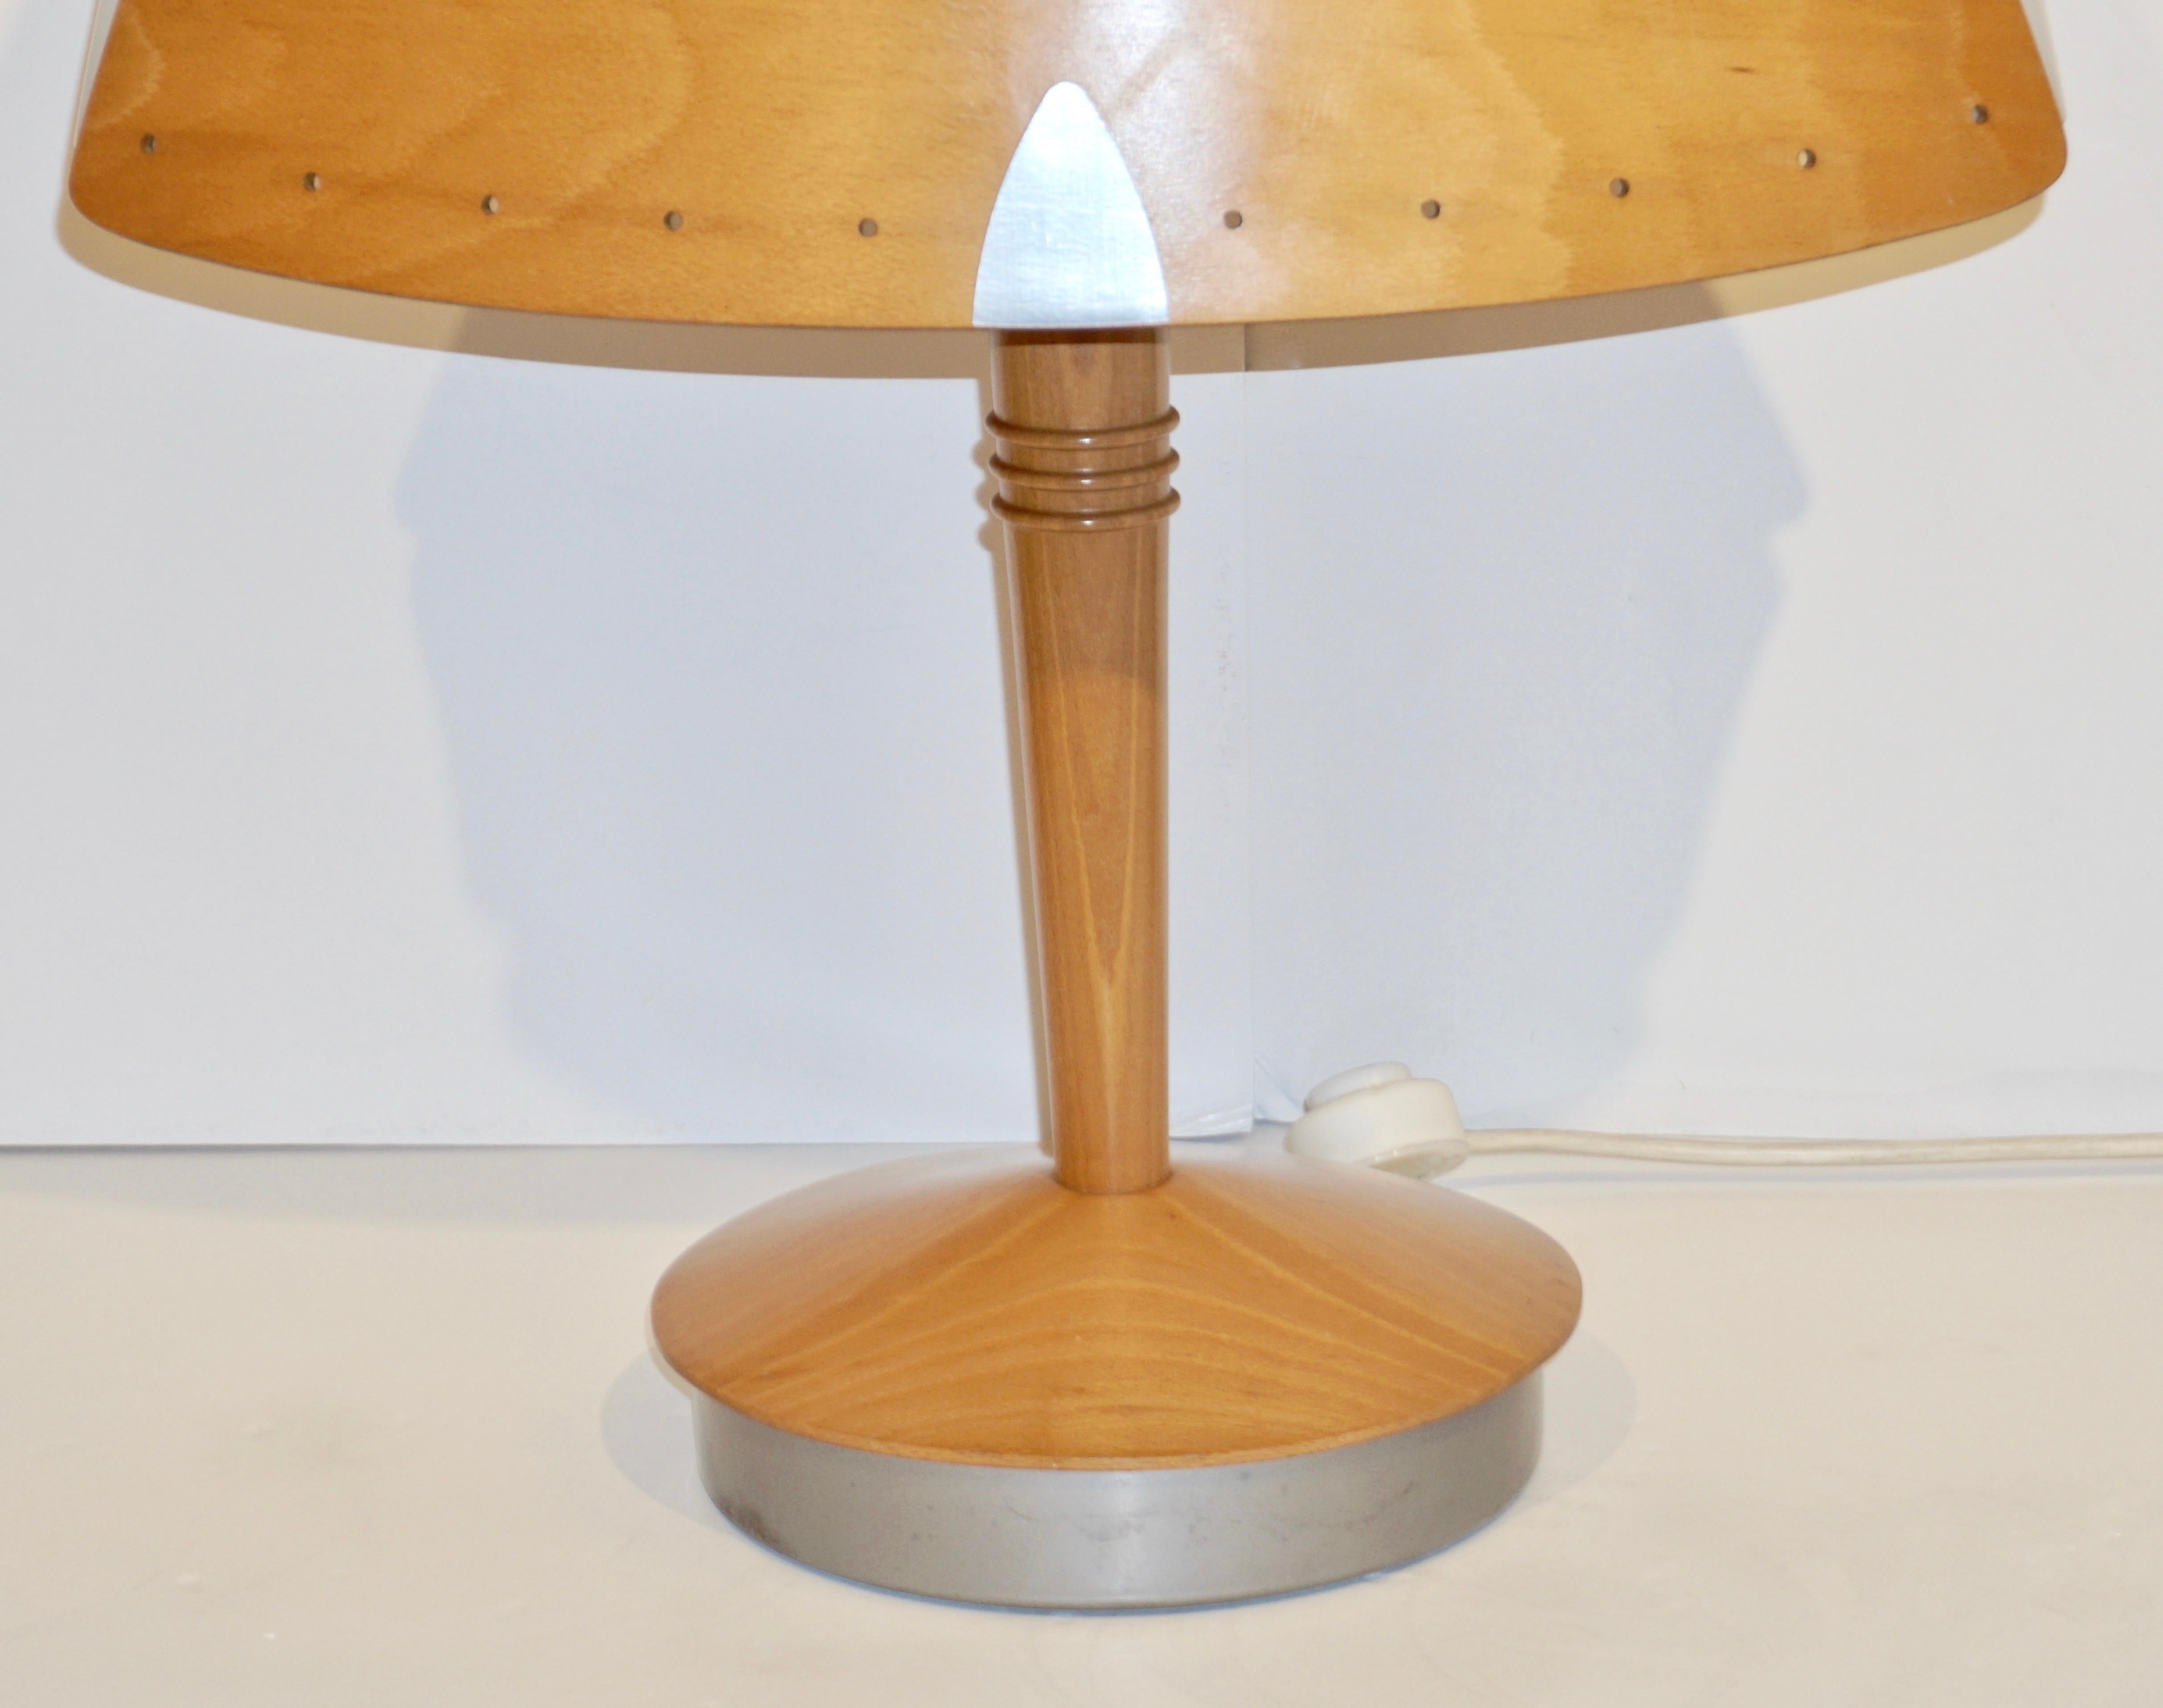 Metal 1970 French Vintage Birch Wood and Acrylic Table Lamp for Barcelona Hilton Hotel For Sale